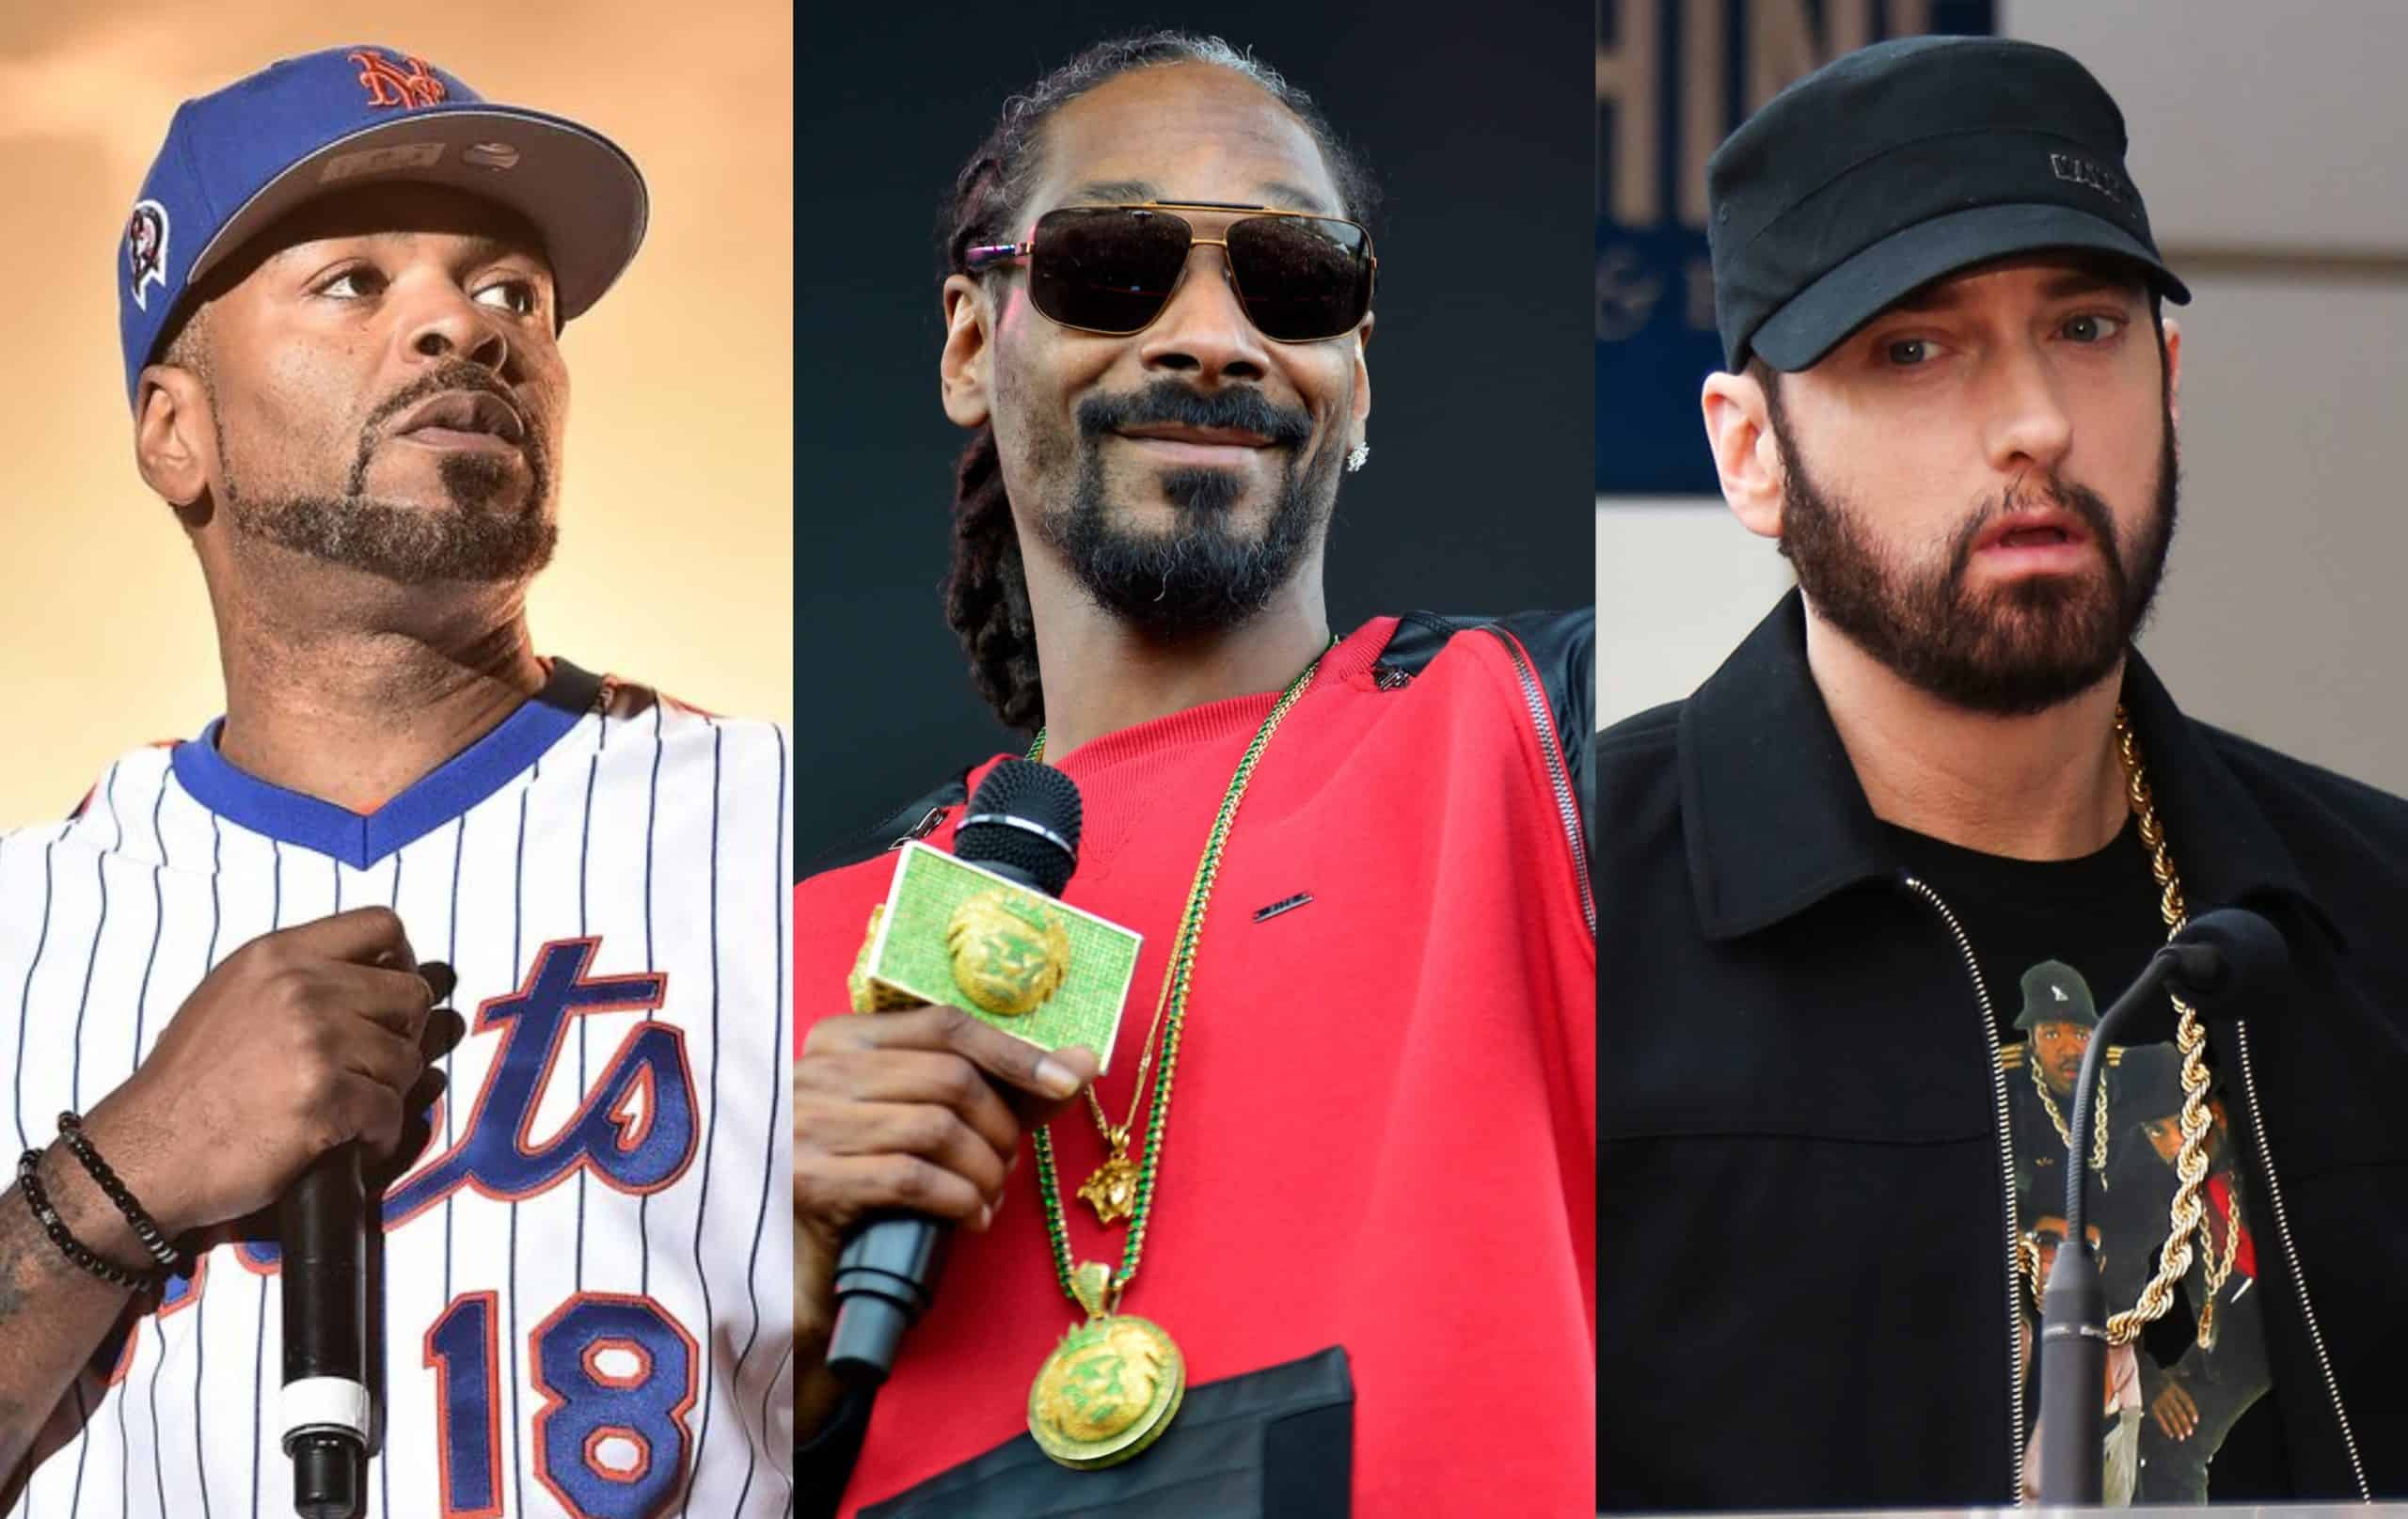 Method Man On Eminem Snoop Dogg Situation He Does Not Have